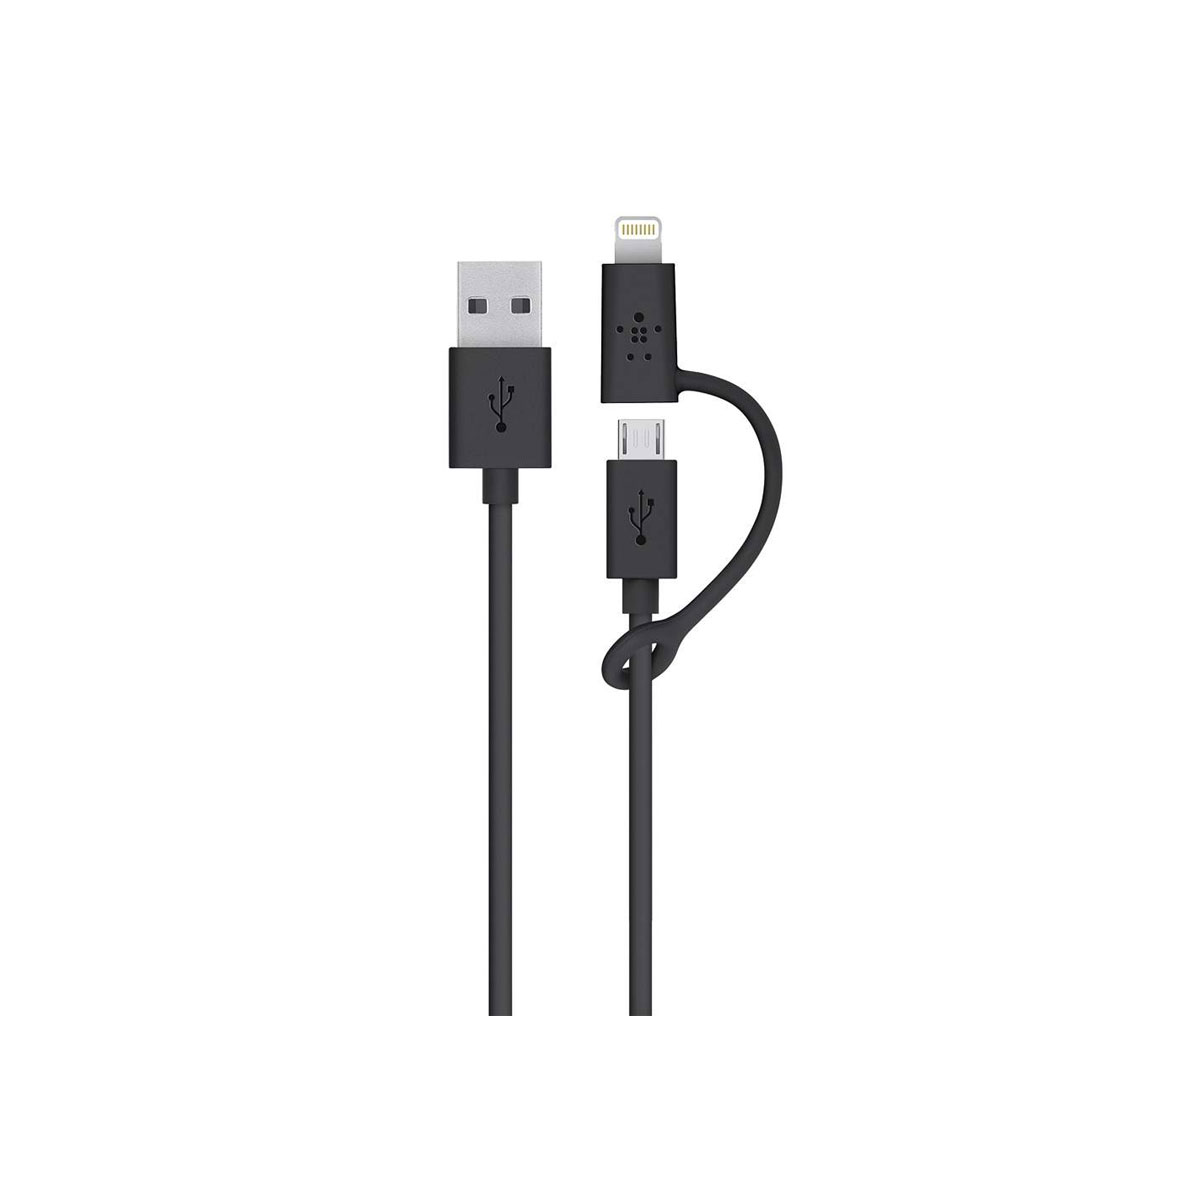 Belkin - Micro-USB Cable with Lightning connector Adapter